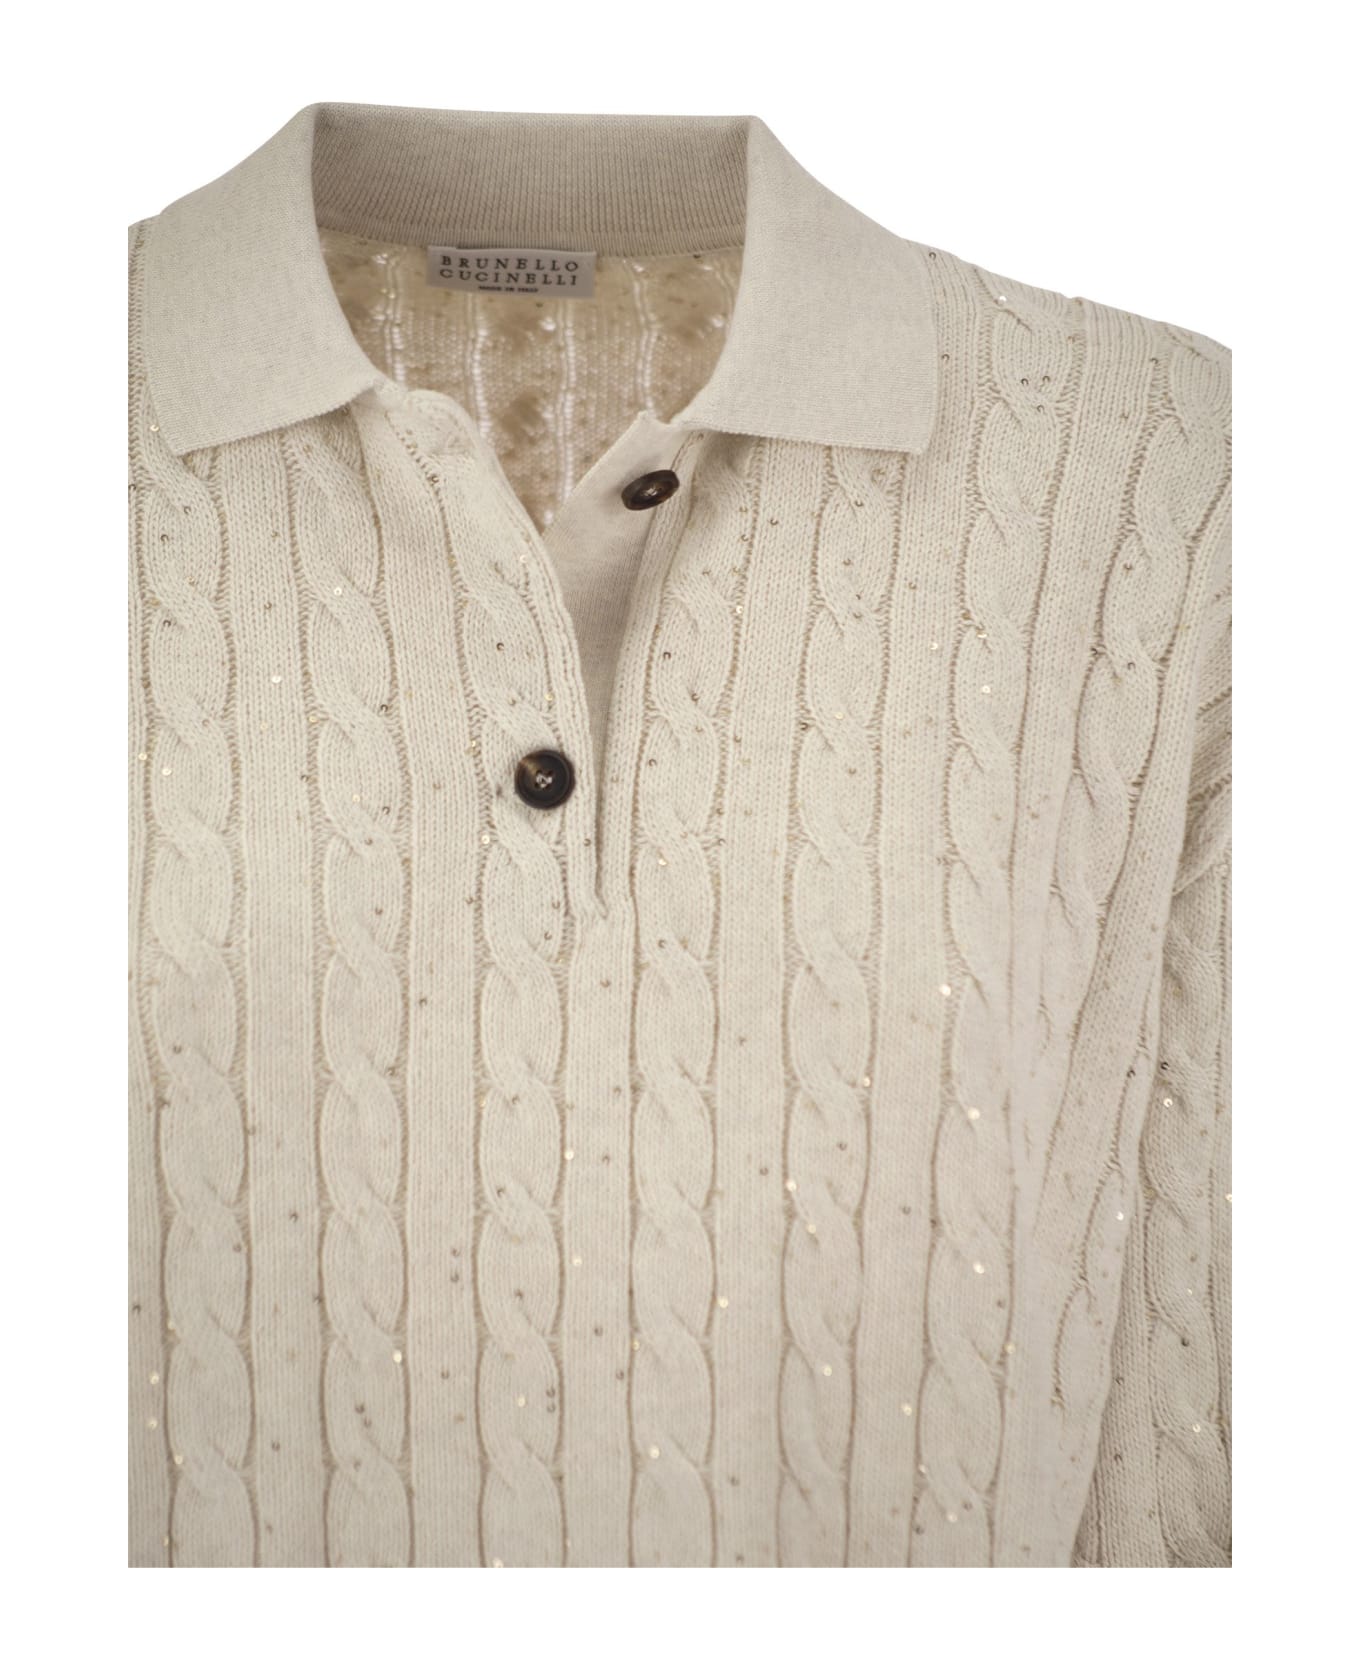 Brunello Cucinelli Dazzling Cables Cotton Polo-style Shirt - Beige ニットウェア